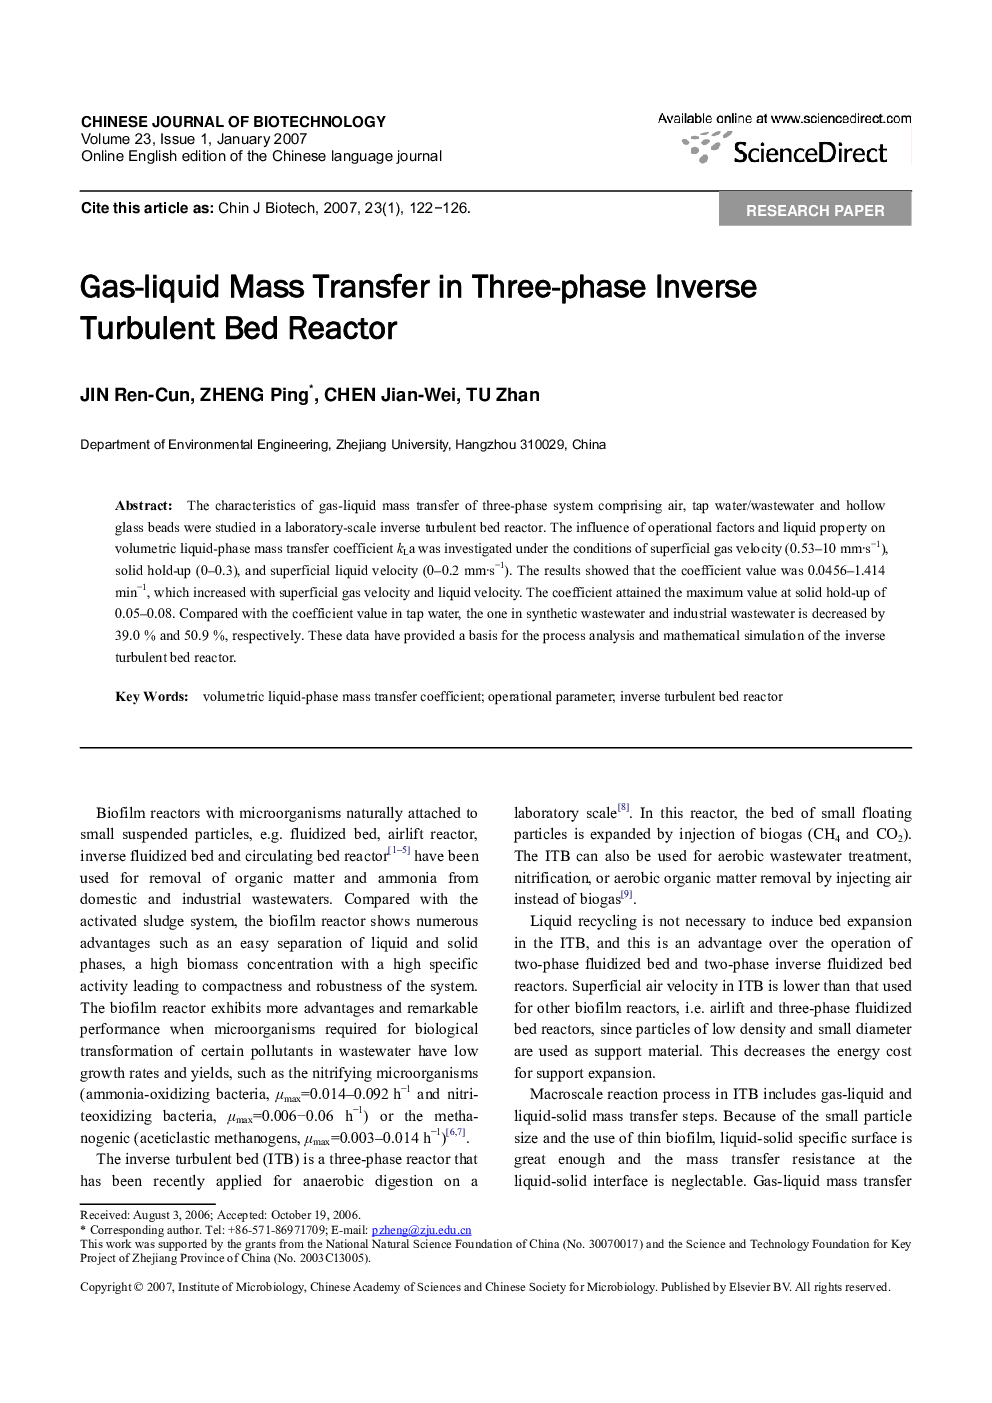 Gas-liquid Mass Transfer in Three-phase Inverse Turbulent Bed Reactor